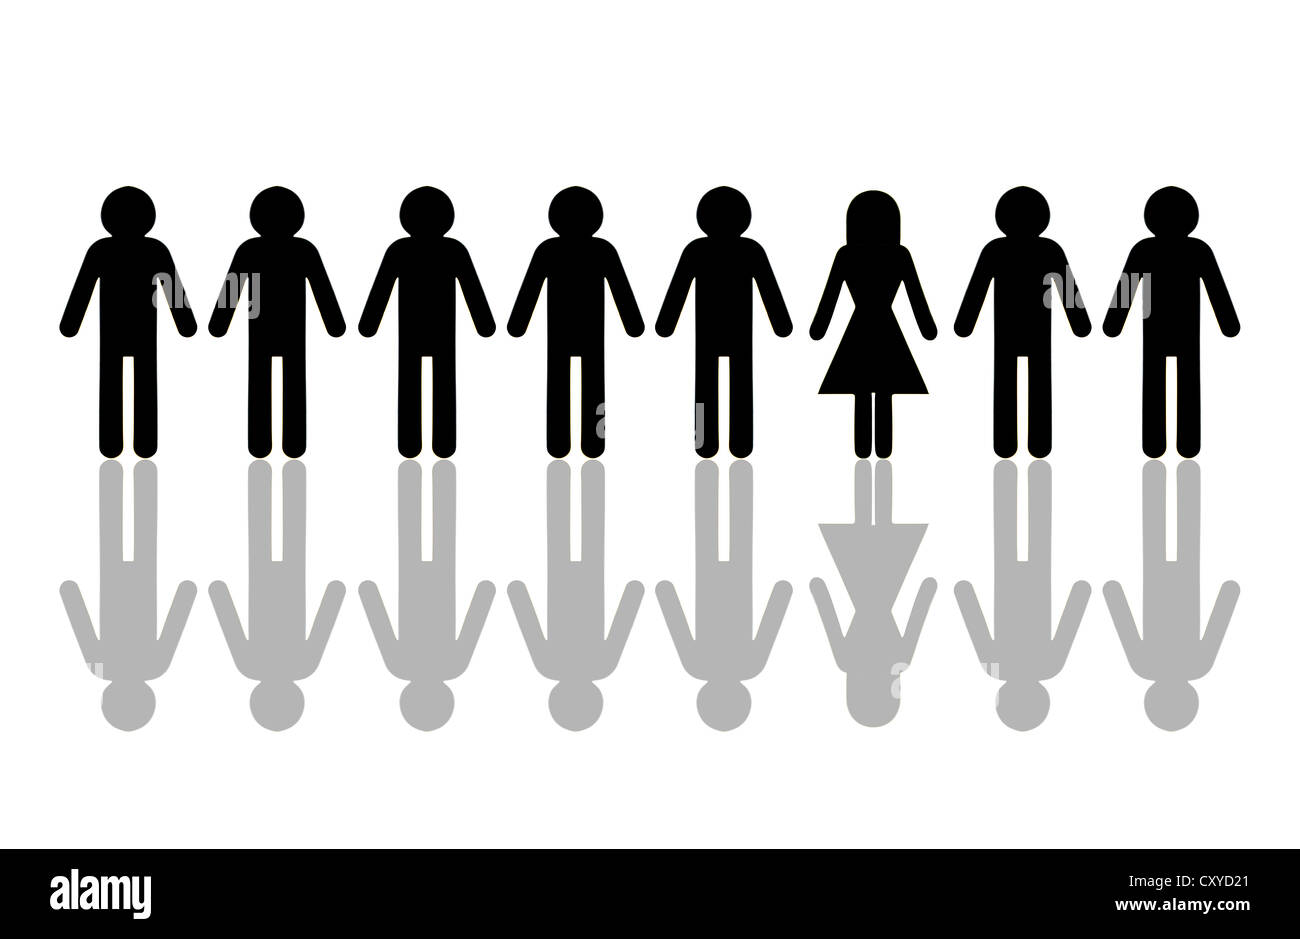 Row of male pictogram figures, with a single female figure, symbolic image for women's quota Stock Photo